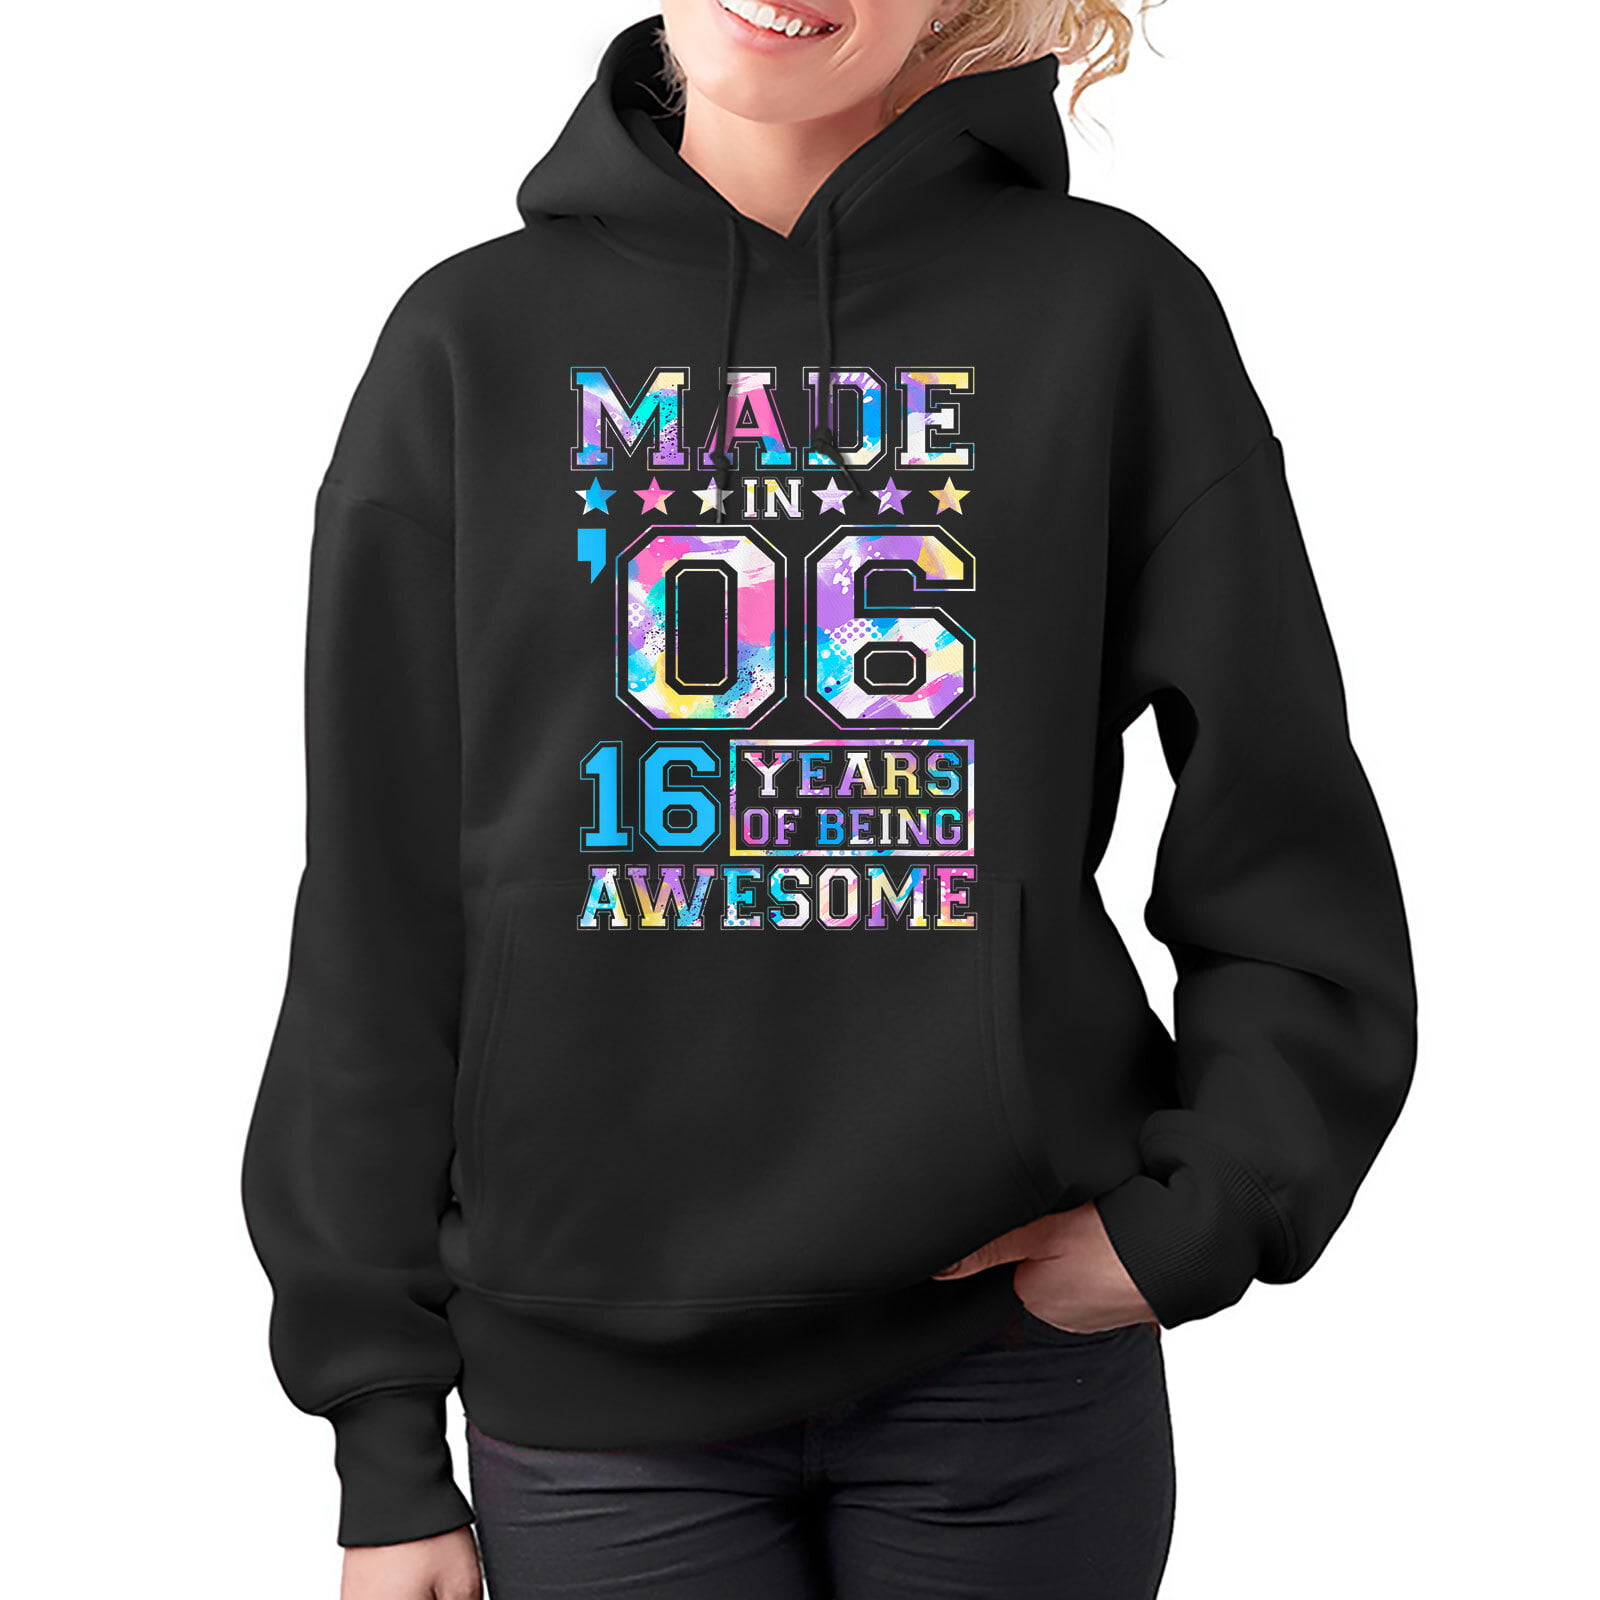 16 Birthday Teenager boys girls hoodie unisex 16 Birthday Gift shirt Vintage 16th Years Old Awesome 2006 limited edition shirt